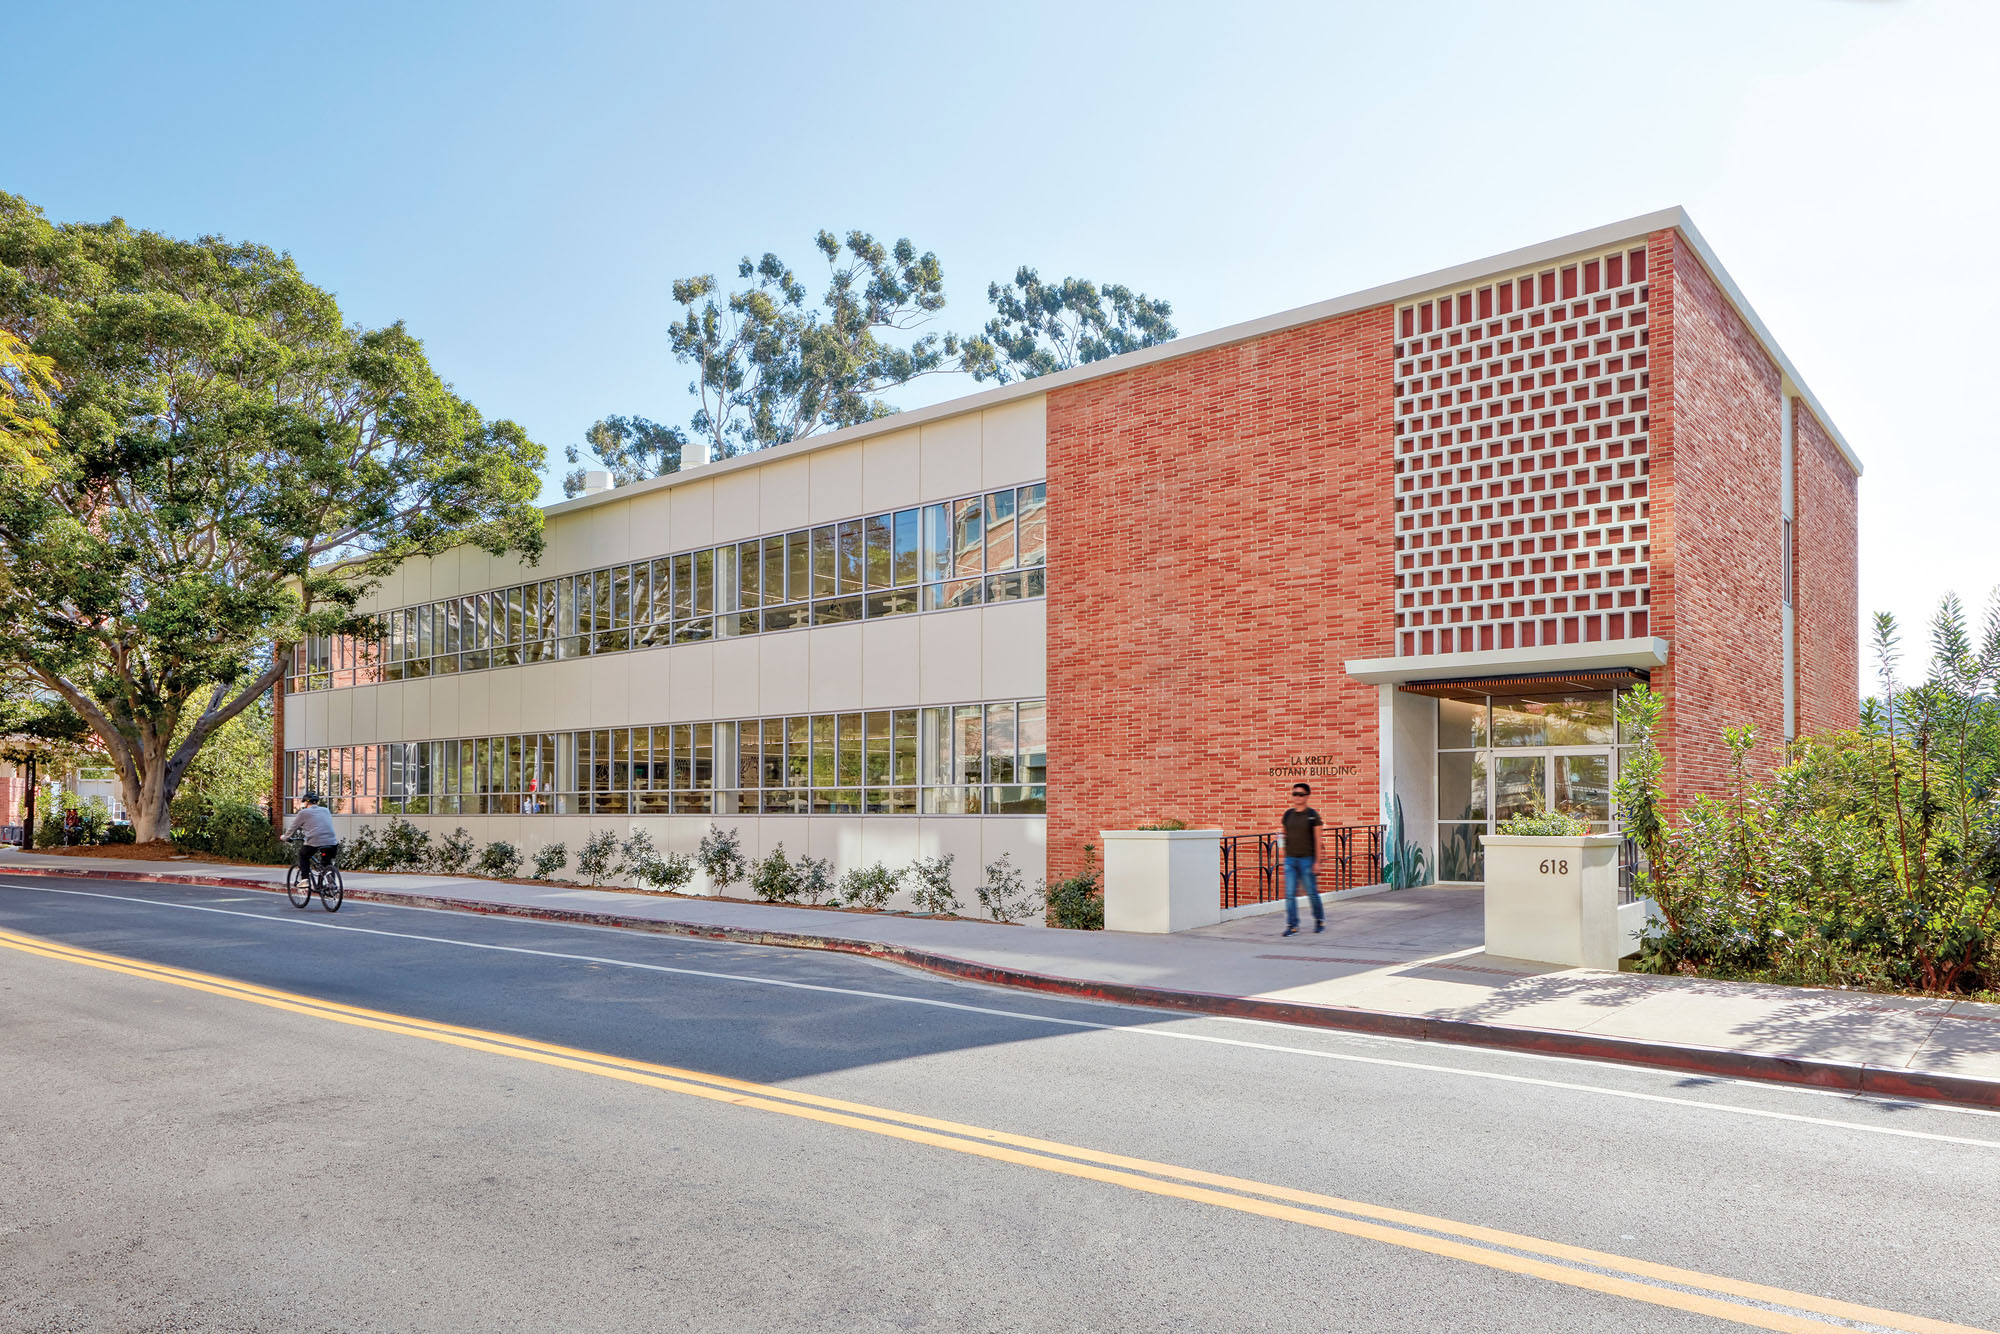 a photograph of the exterior of a brick building on the UCLA campus